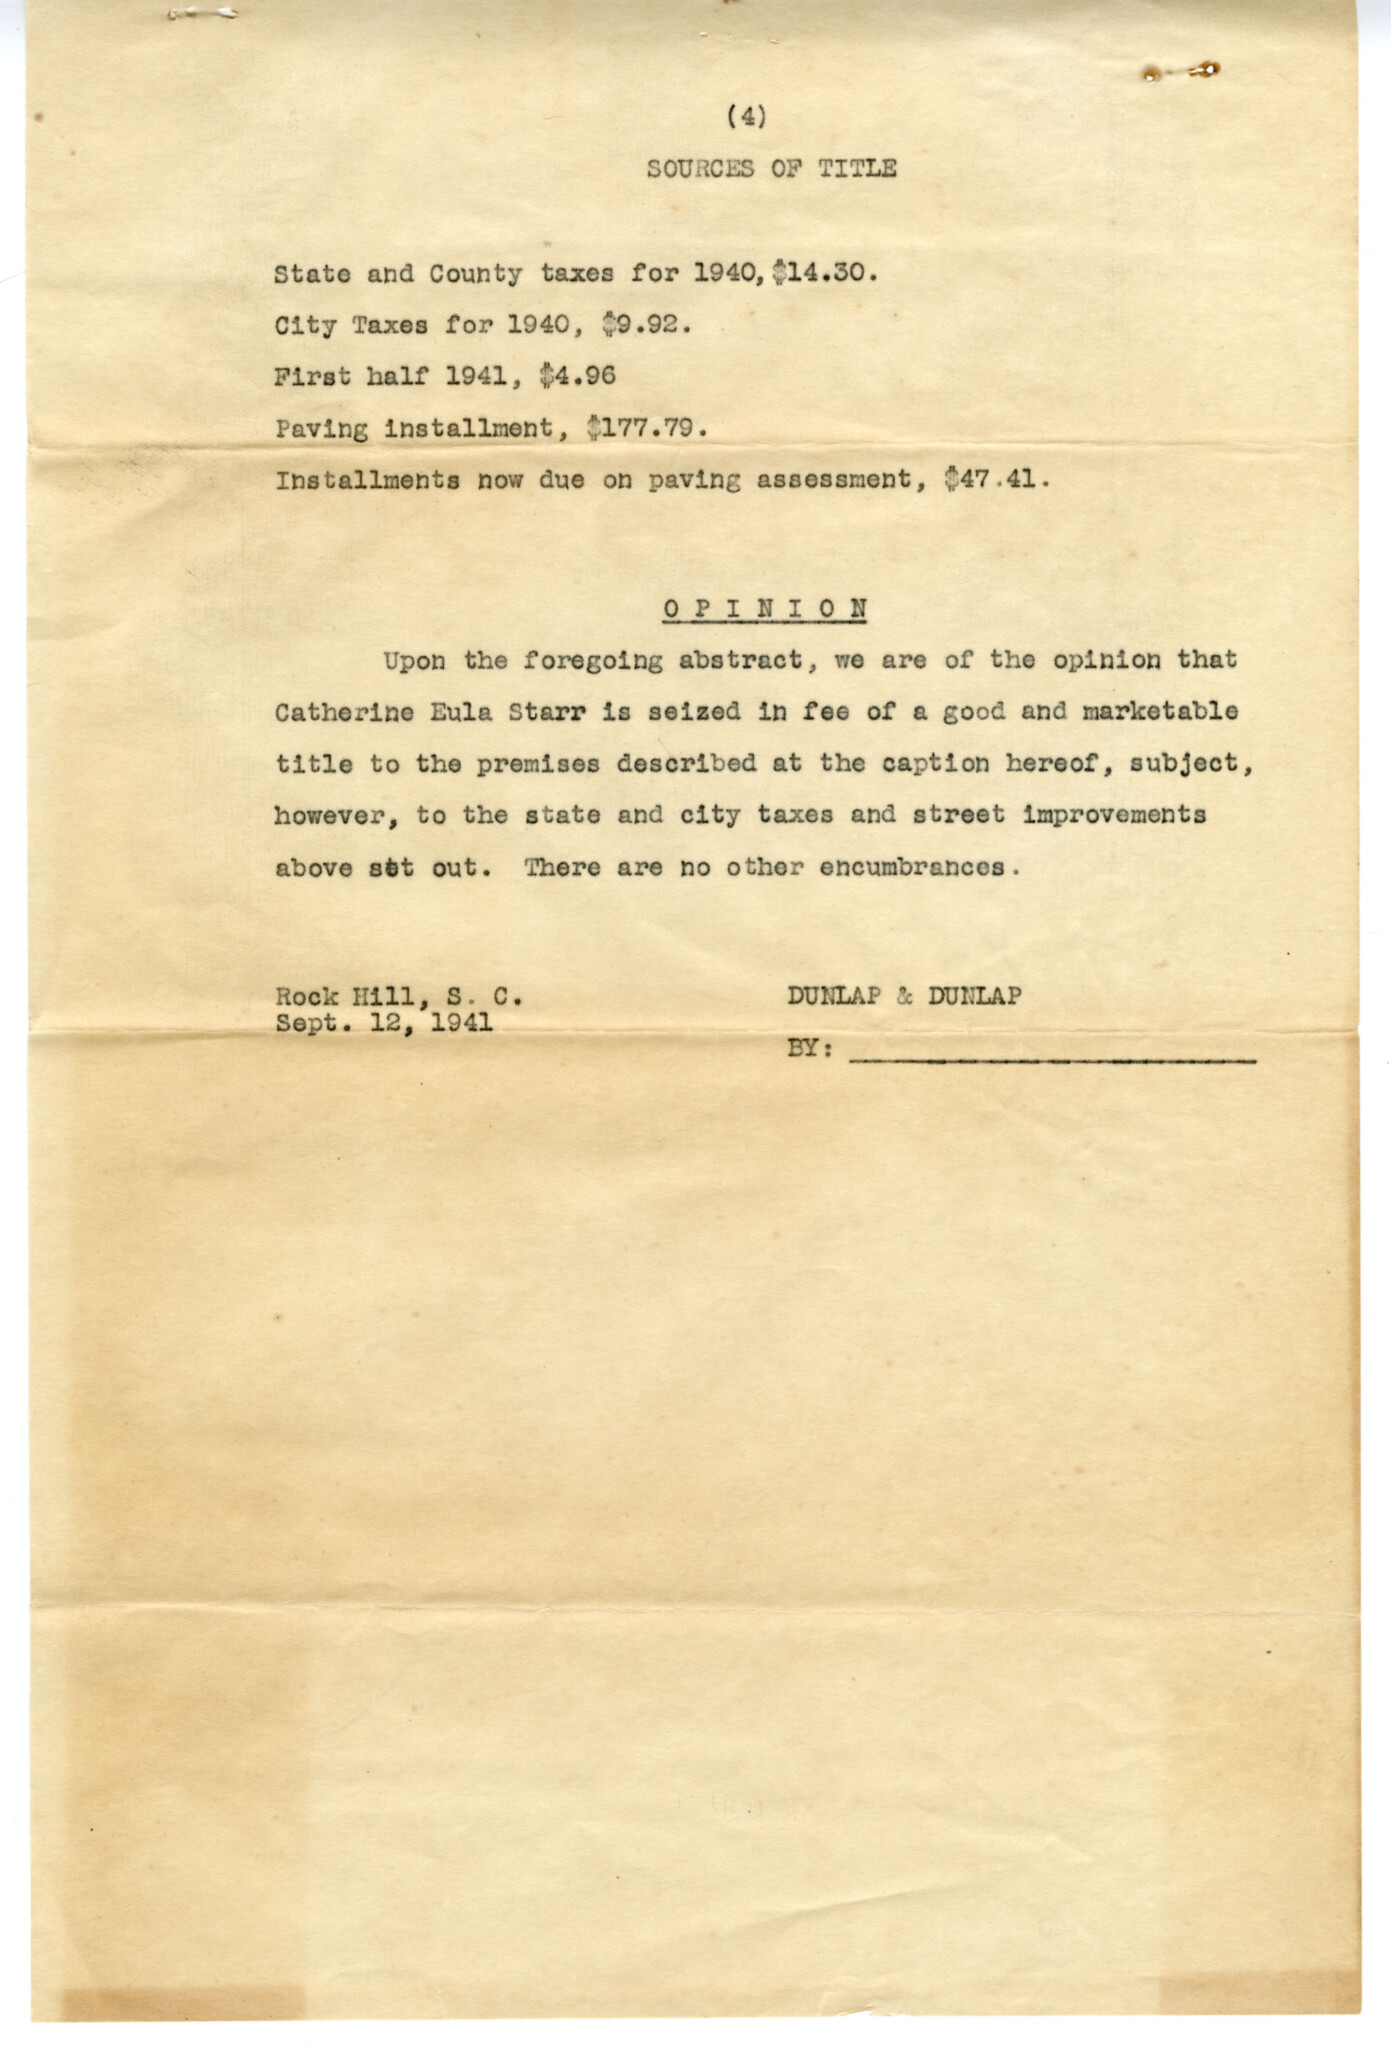 LEGAL DOCUMENTS RELATED TO THE IVY PROPERTY - P. 4  WU PETTUS ARCHIVES COLLECTION